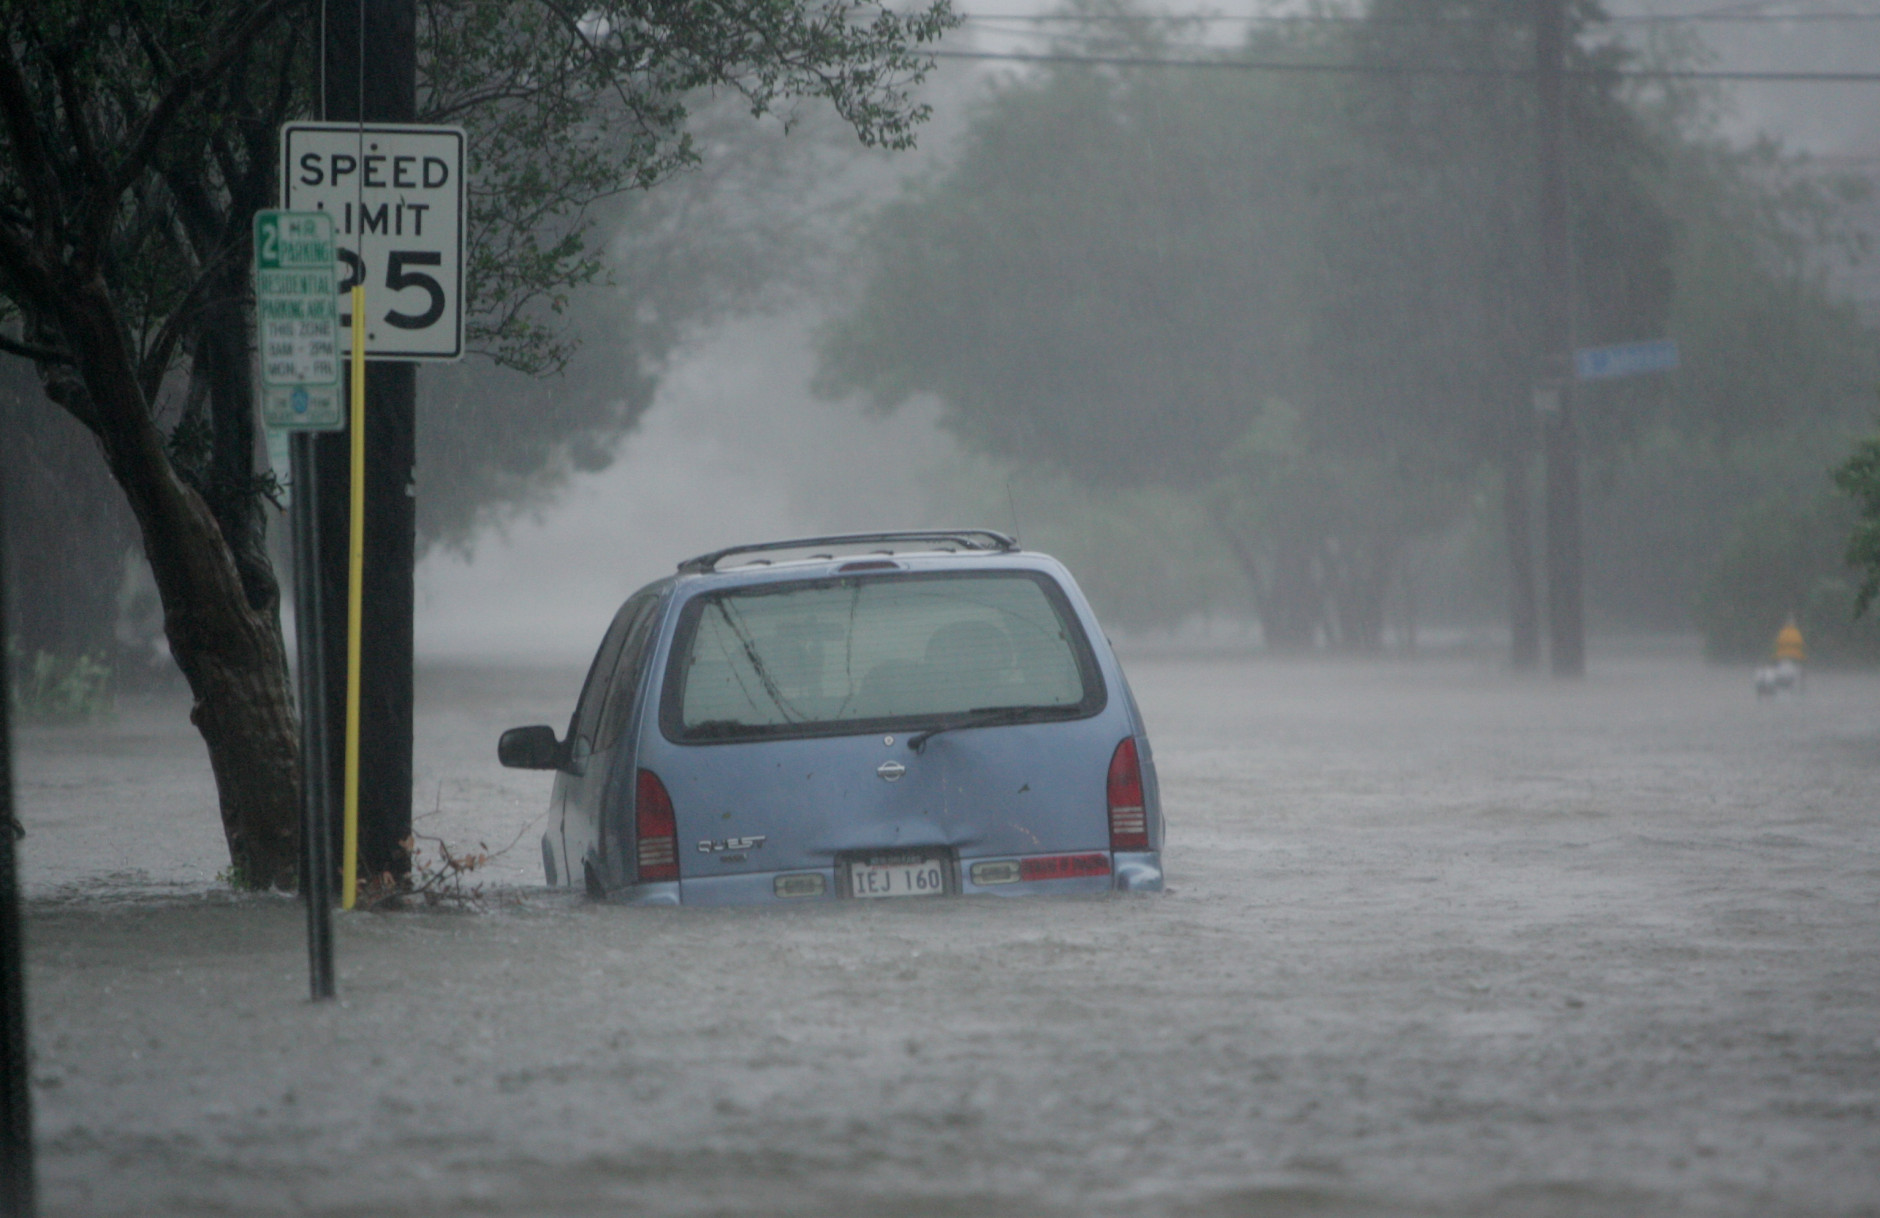 Floodwaters surround a car in uptown New Orleans early Monday, Aug. 29, 2005 as high winds and rain batter the Louisiana coast as Hurricane Katrina makes landfall. (AP Photo/Dave Martin)